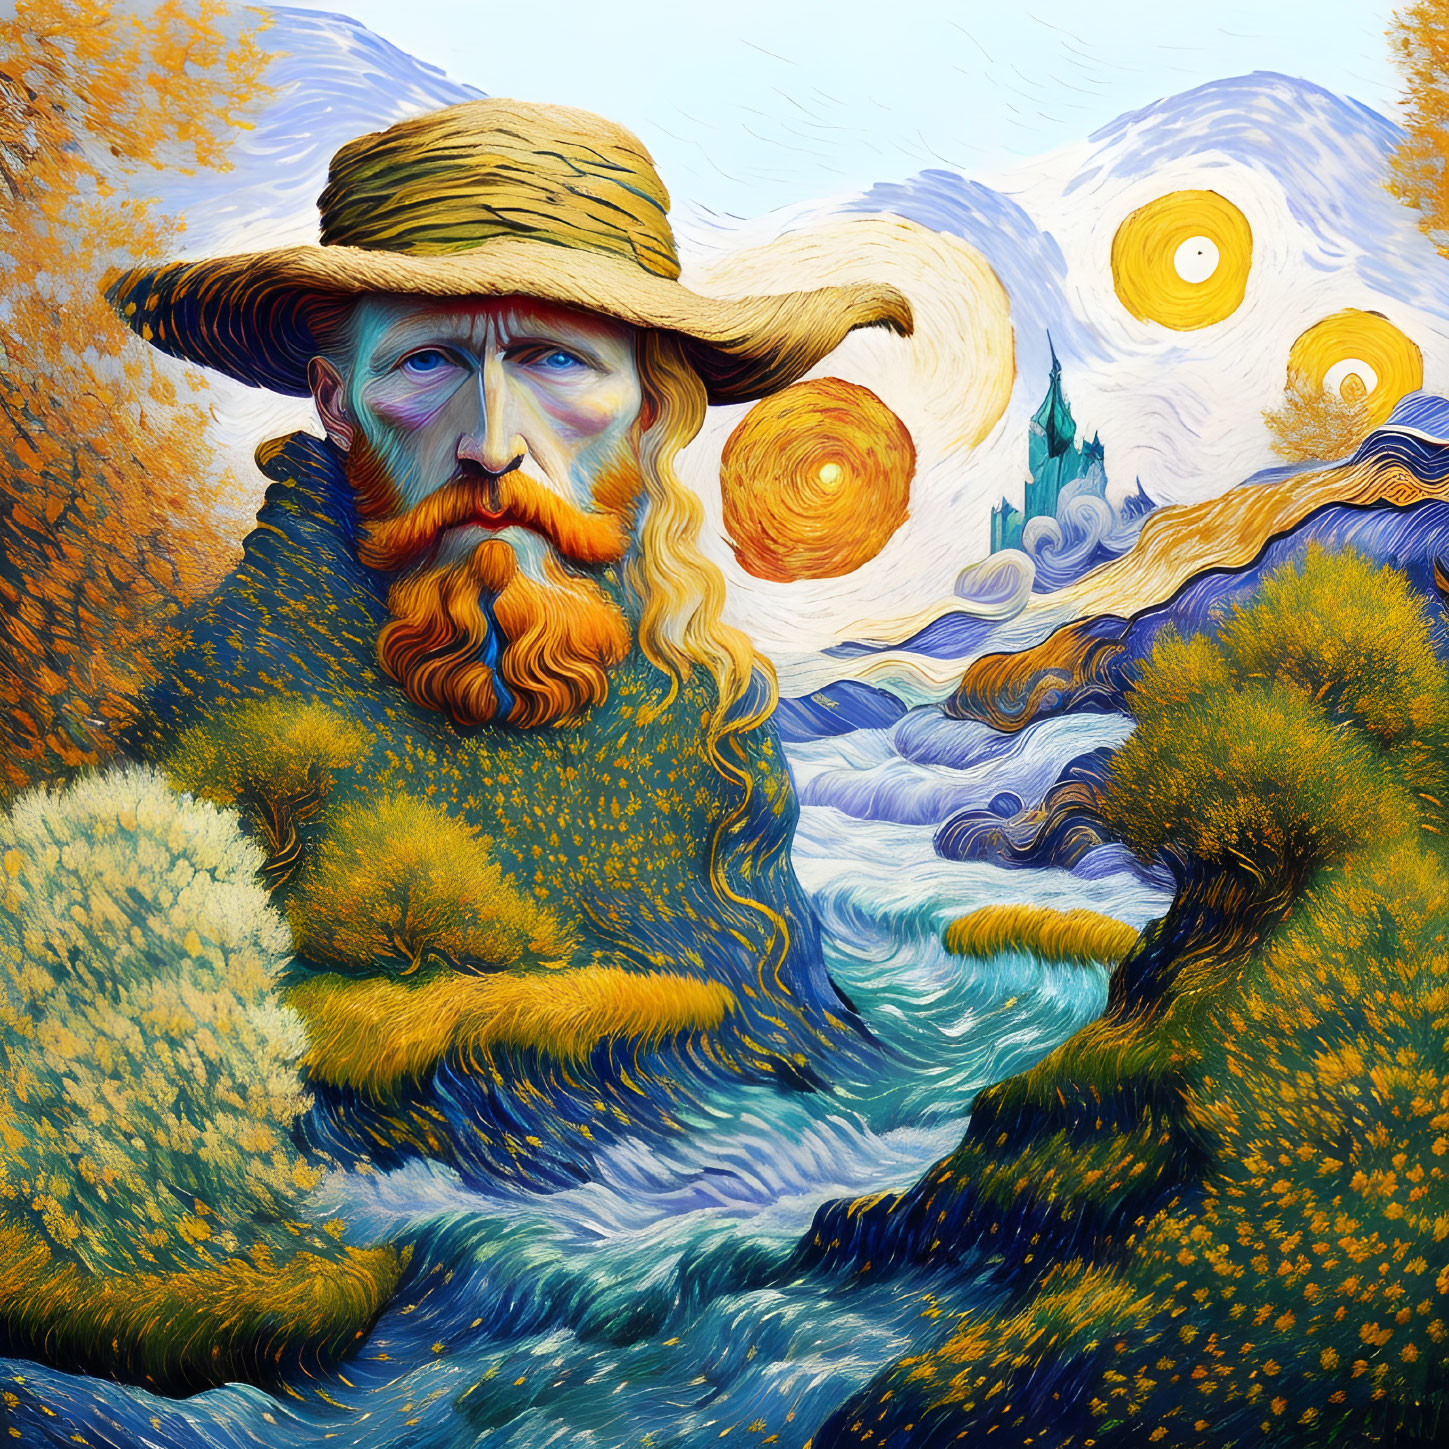 Man with flowing beard and hat in Starry Night-inspired portrait